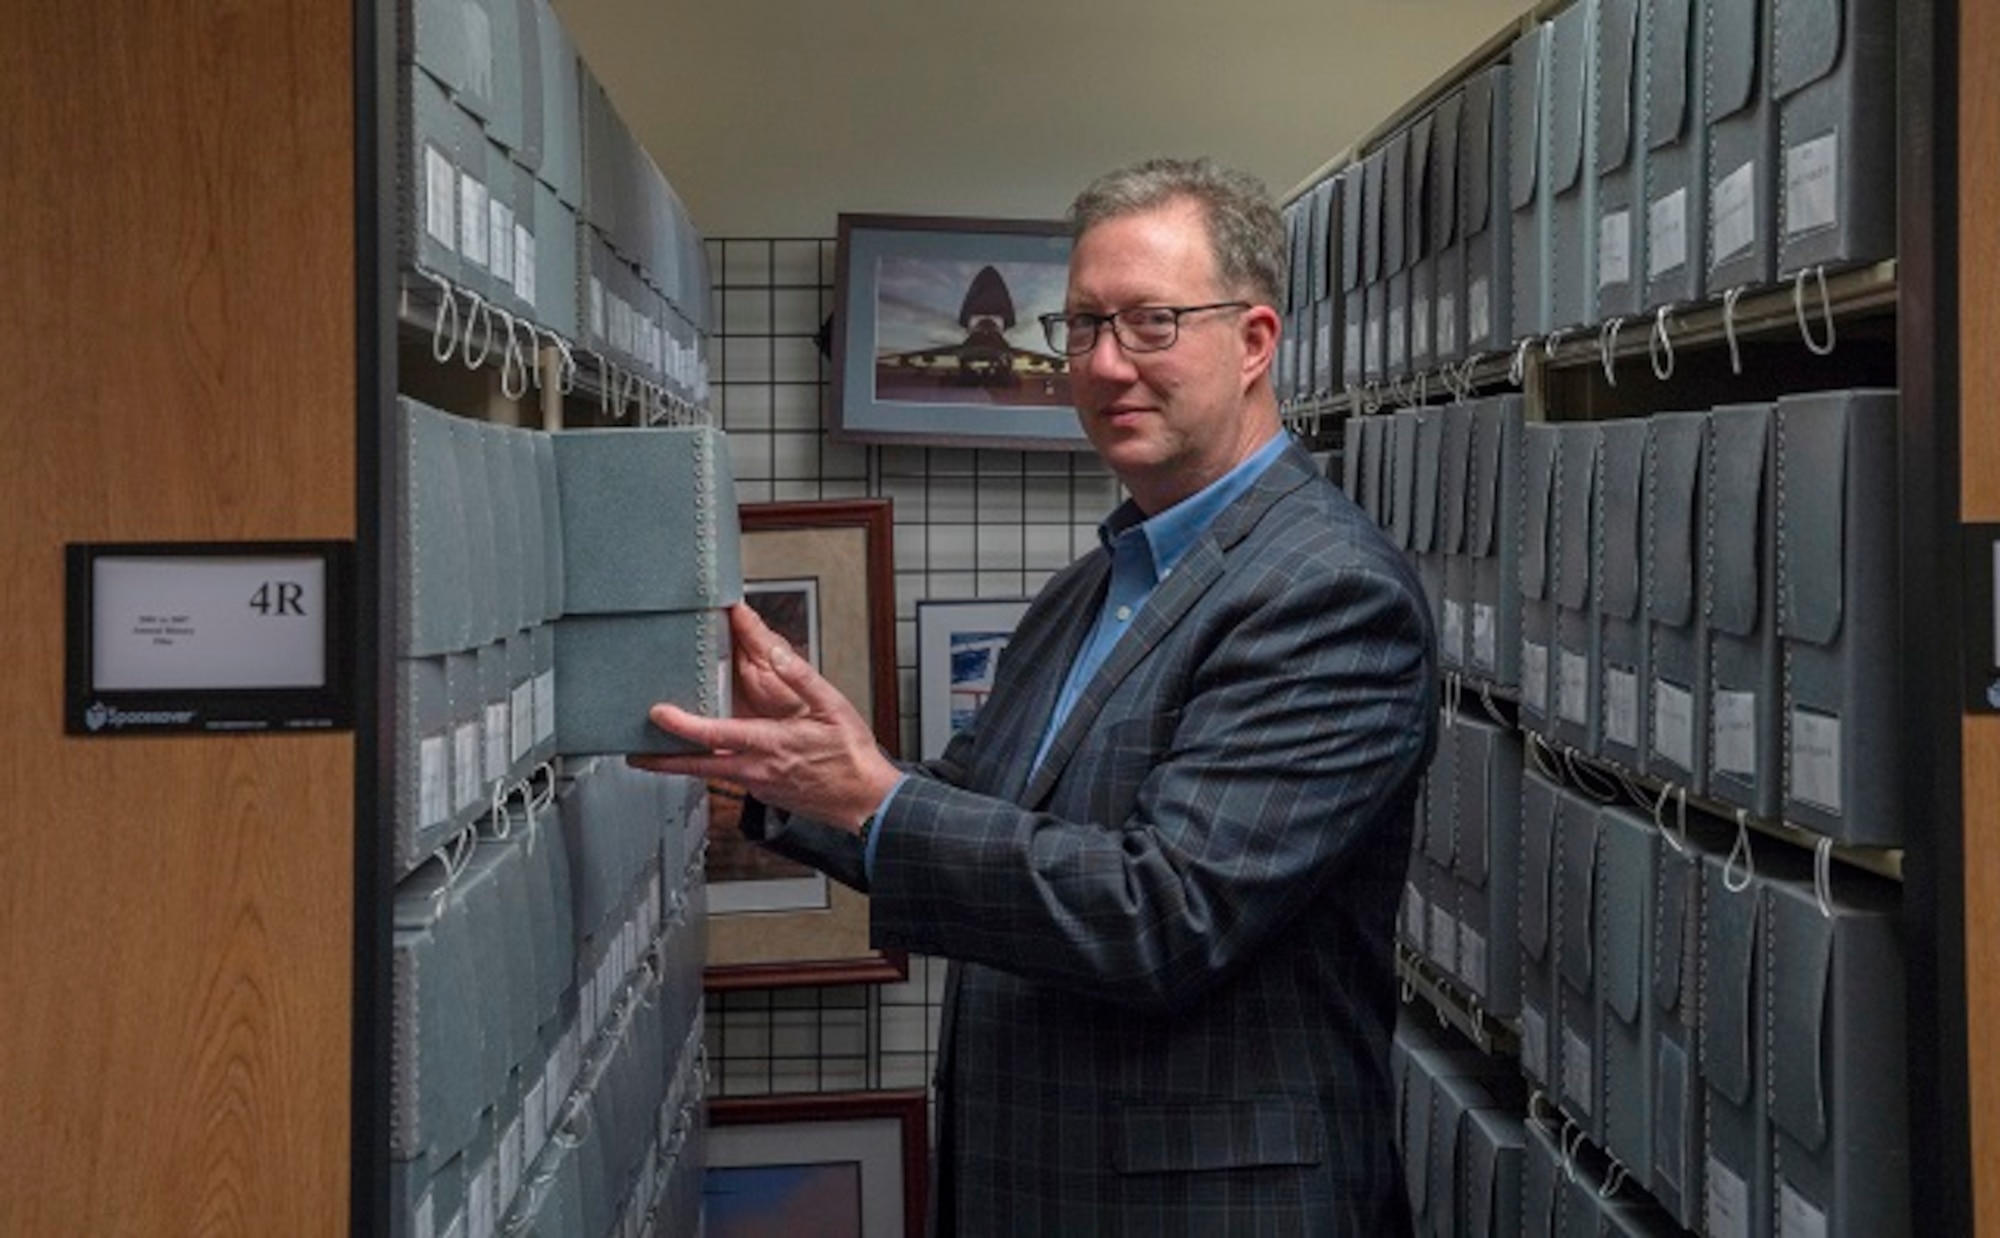 U.S. Transportation Command Historian Dr. Joseph Mason is pictured reviewing archived historical documents in the organization’s History Office, Feb. 11, 2020.